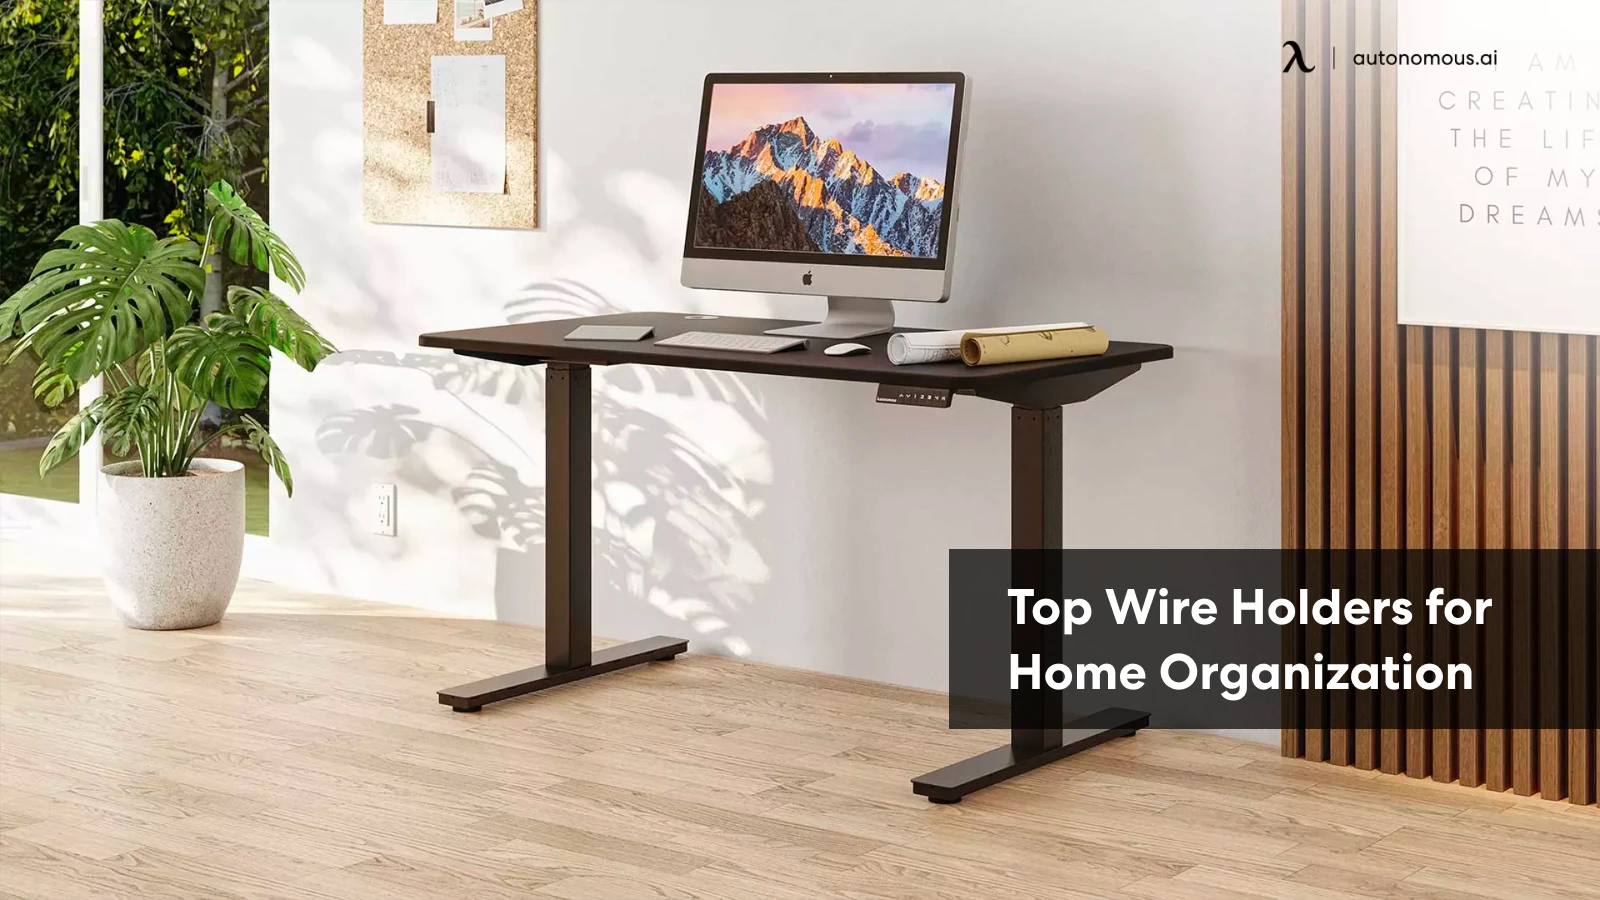 Wire Holder Solutions for a Tidy and Tech-savvy Home